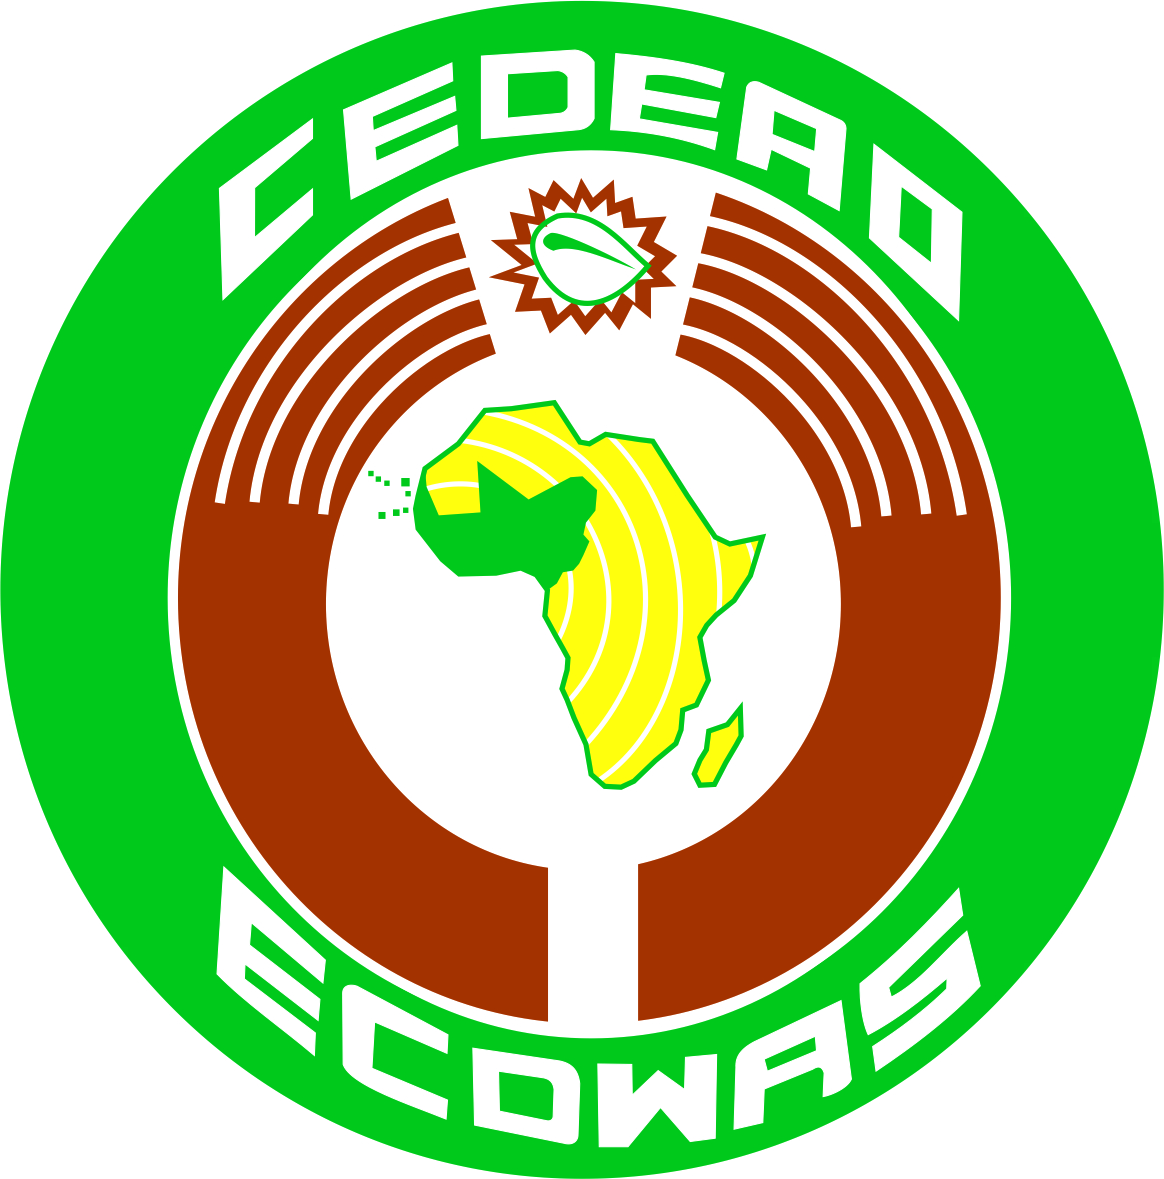 The Permanent Representative Committee of the Economic Community of West African States (ECOWAS–PRC) moves to Consolidate Democracy, Enhance Security and Economic Integration in the Region